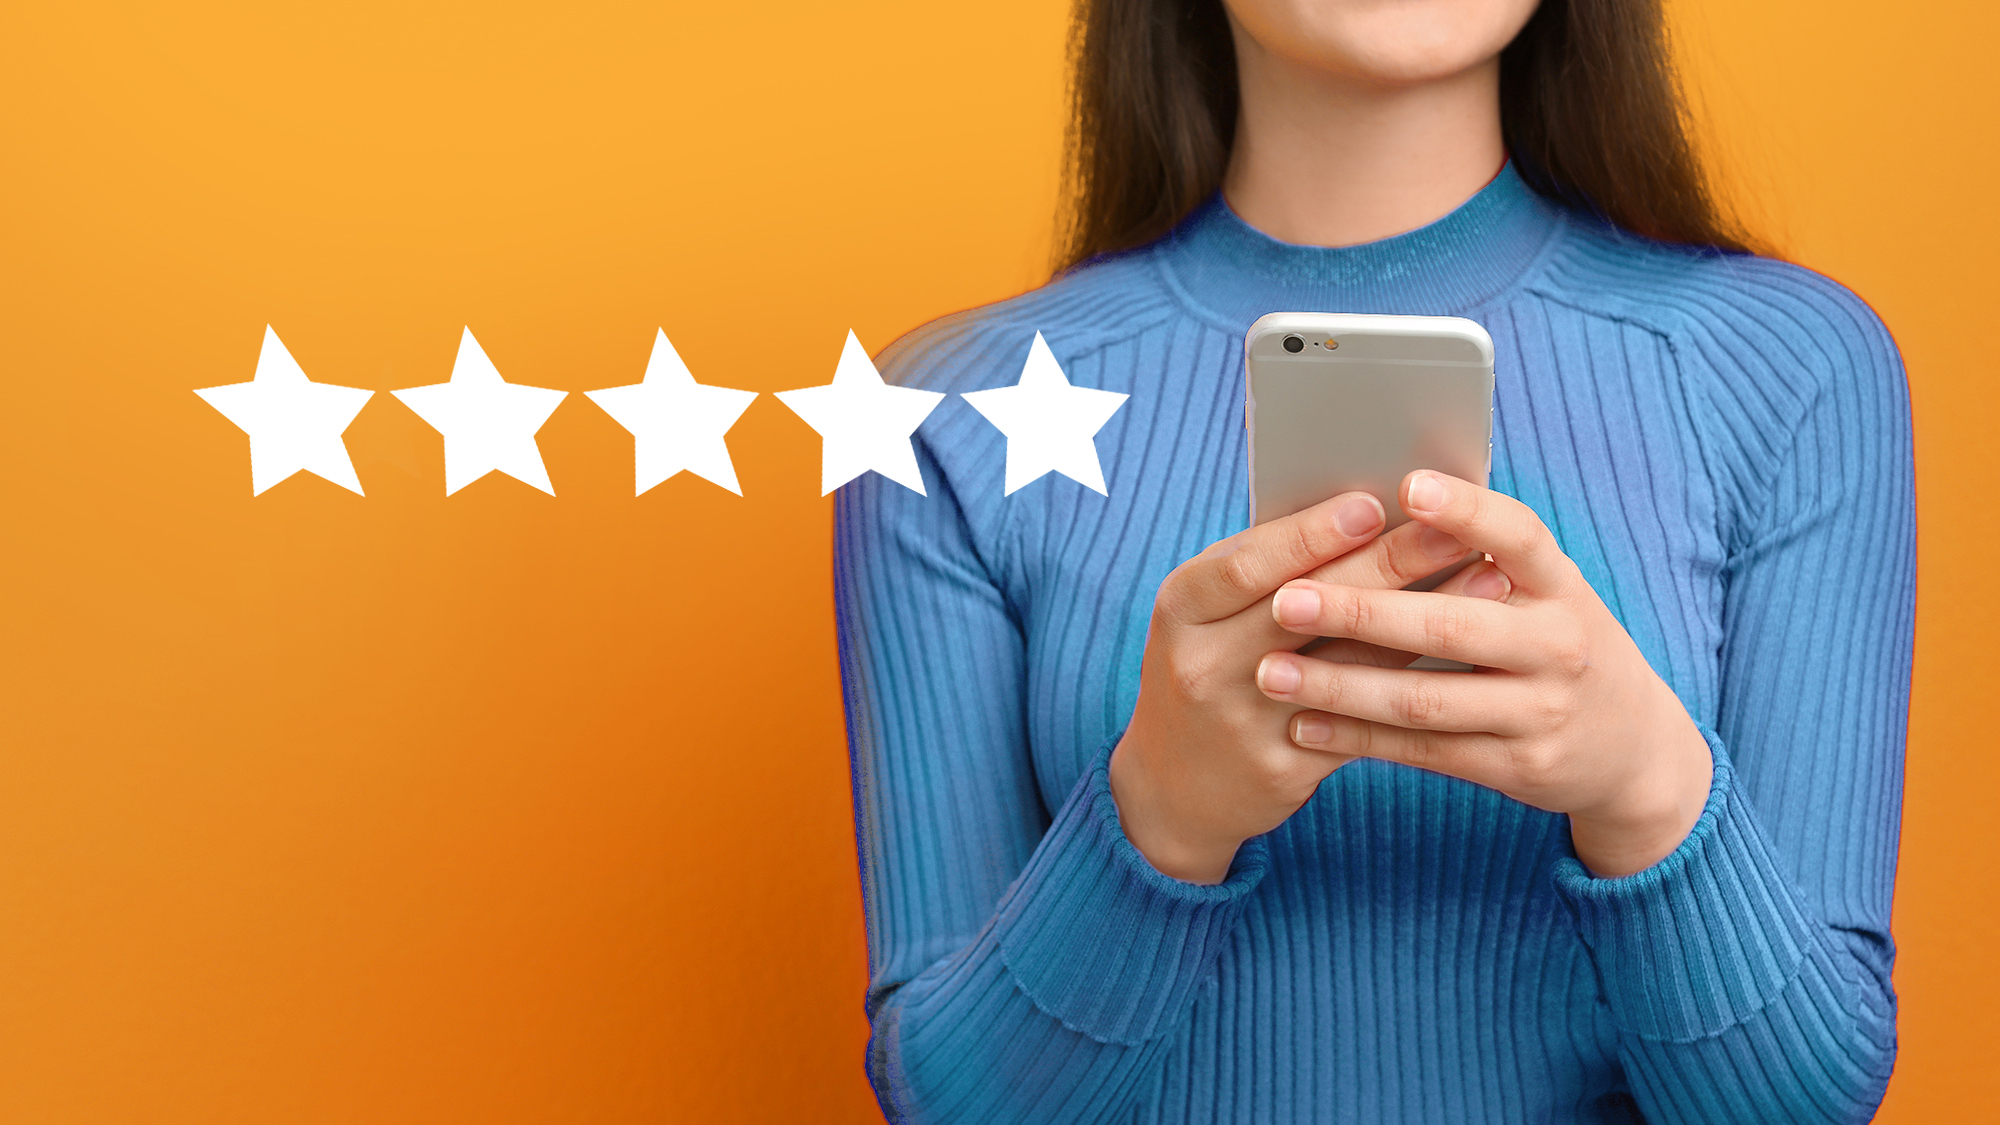 A woman holds up a smartphone to look at it. There are five stars to the left of the woman.